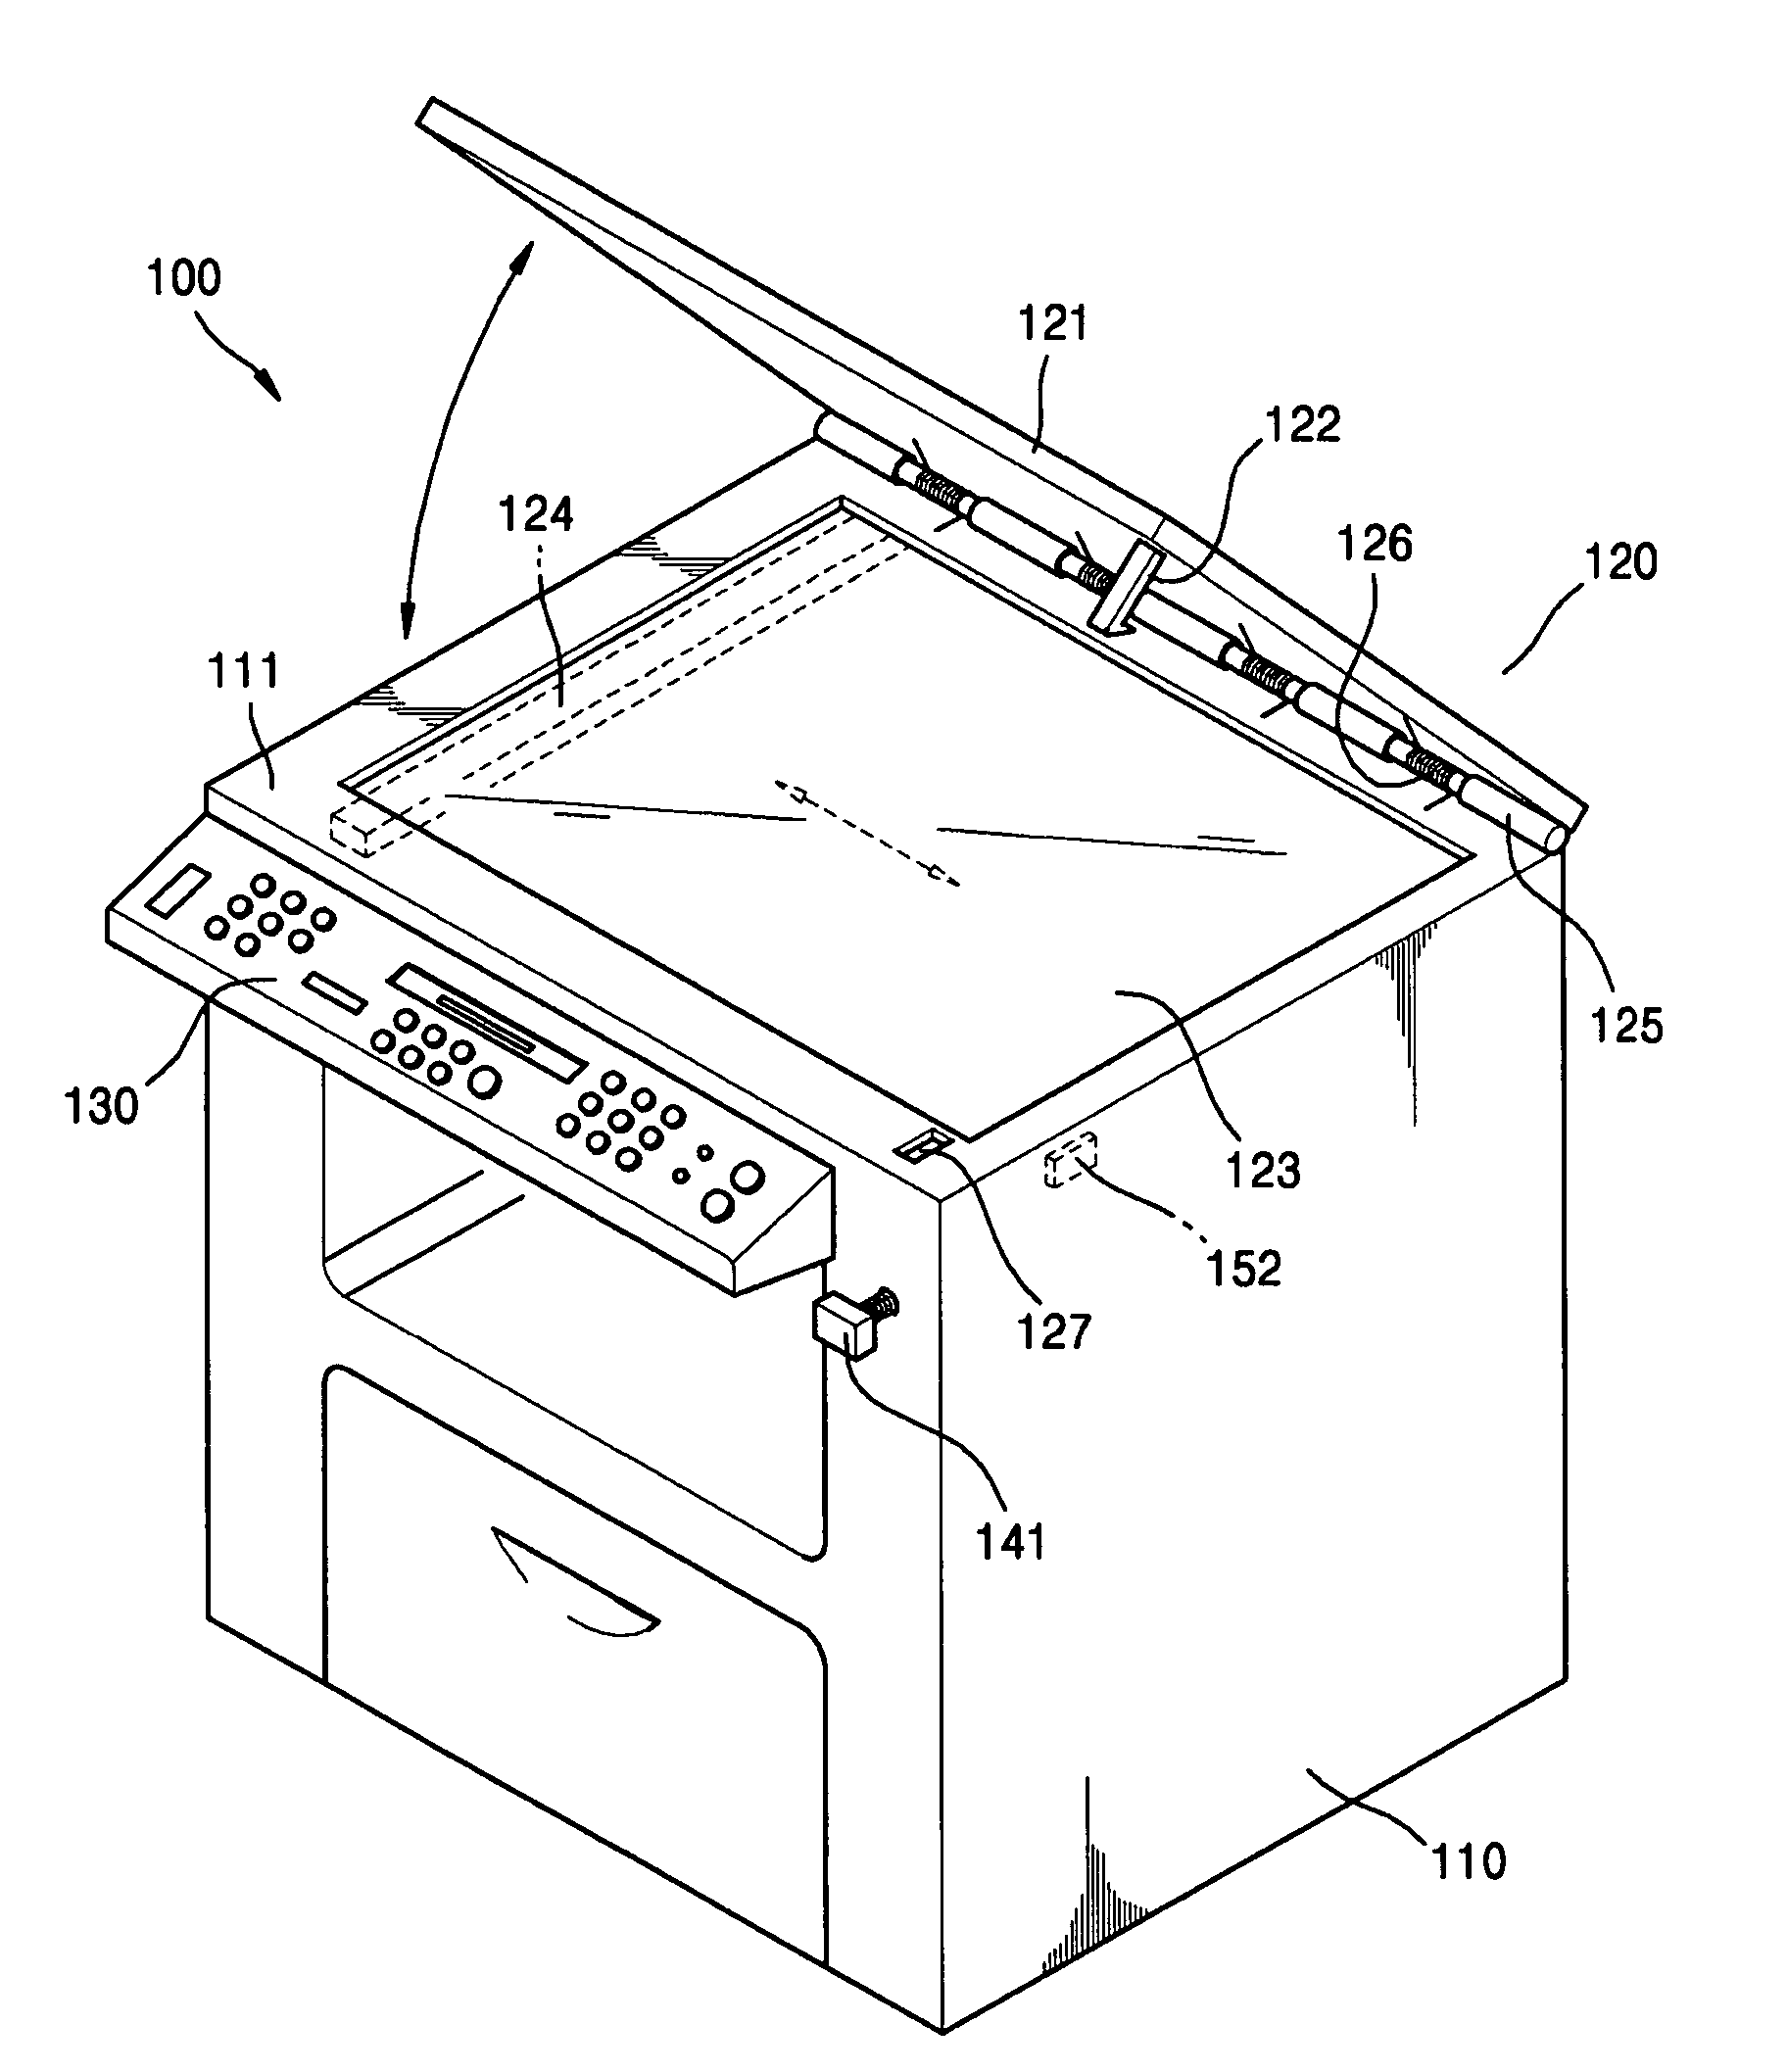 Multi-functional product having a releasing mechanism to activate the opening of a cover relative to a main body